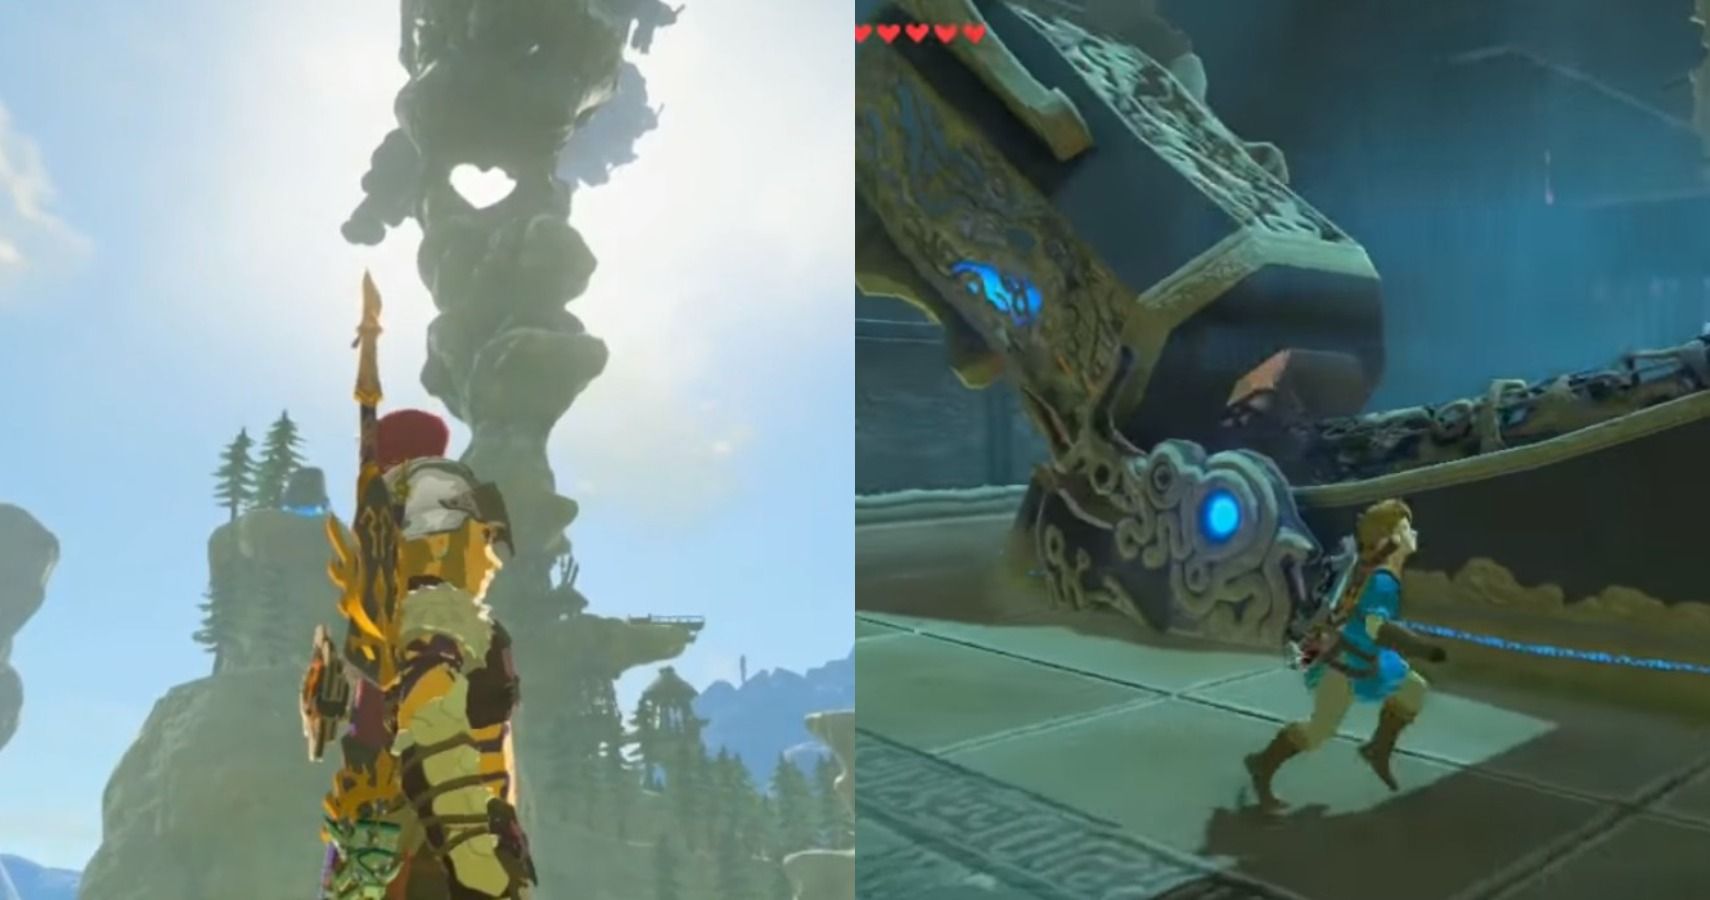 How to complete the Ancient Rito Song shrine quest in Breath of the Wild